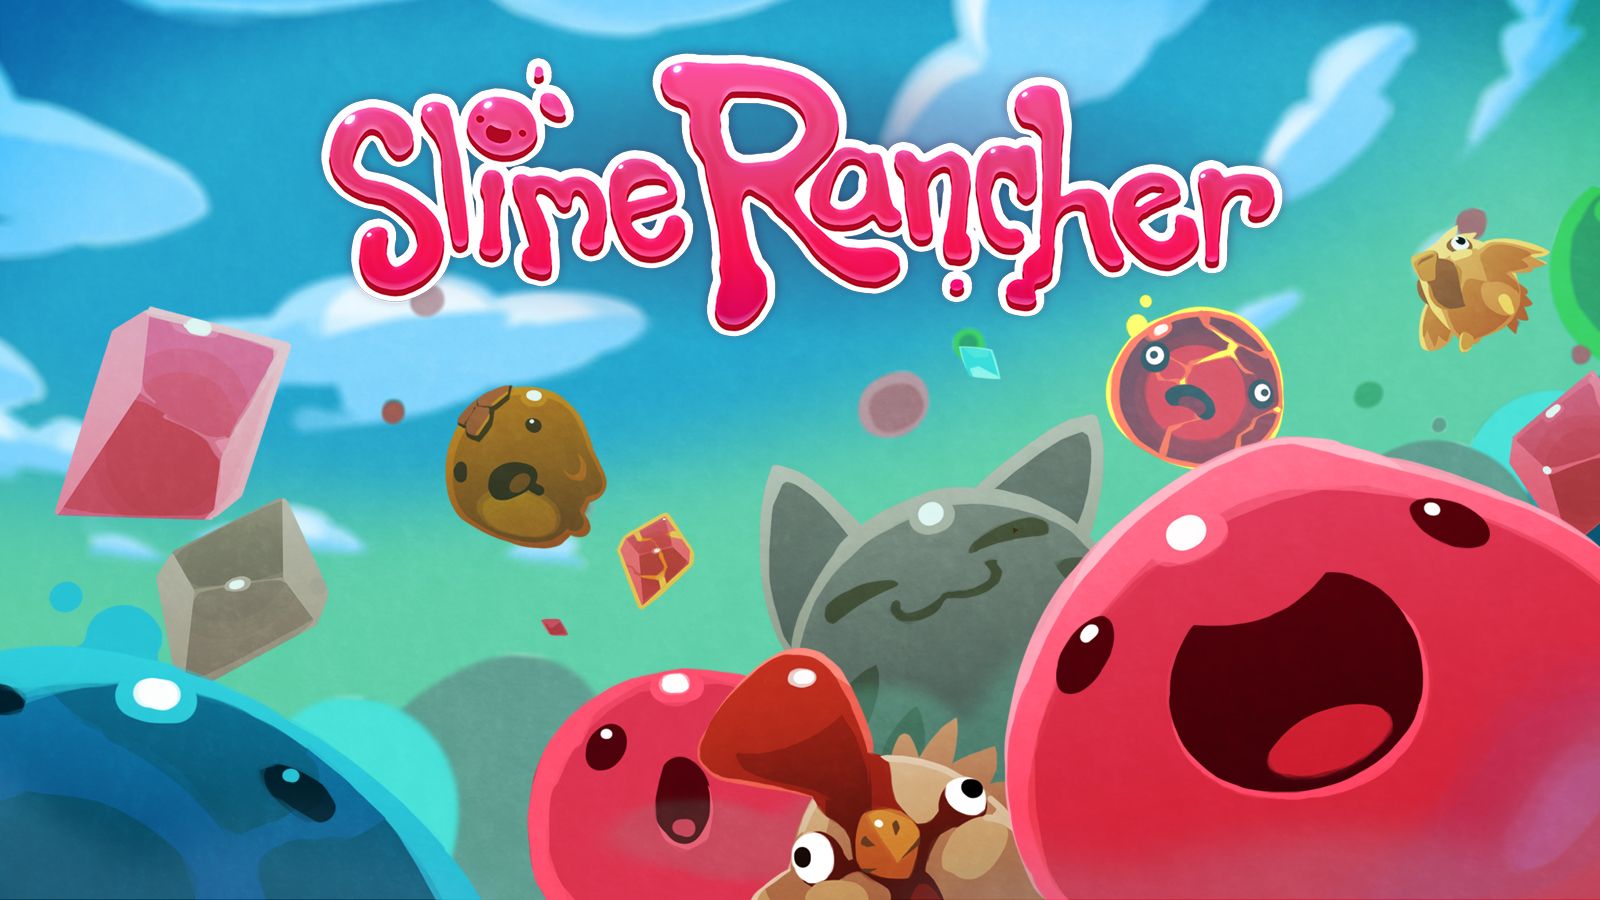 Slime Rancher Review - The Story of Slime Rancher